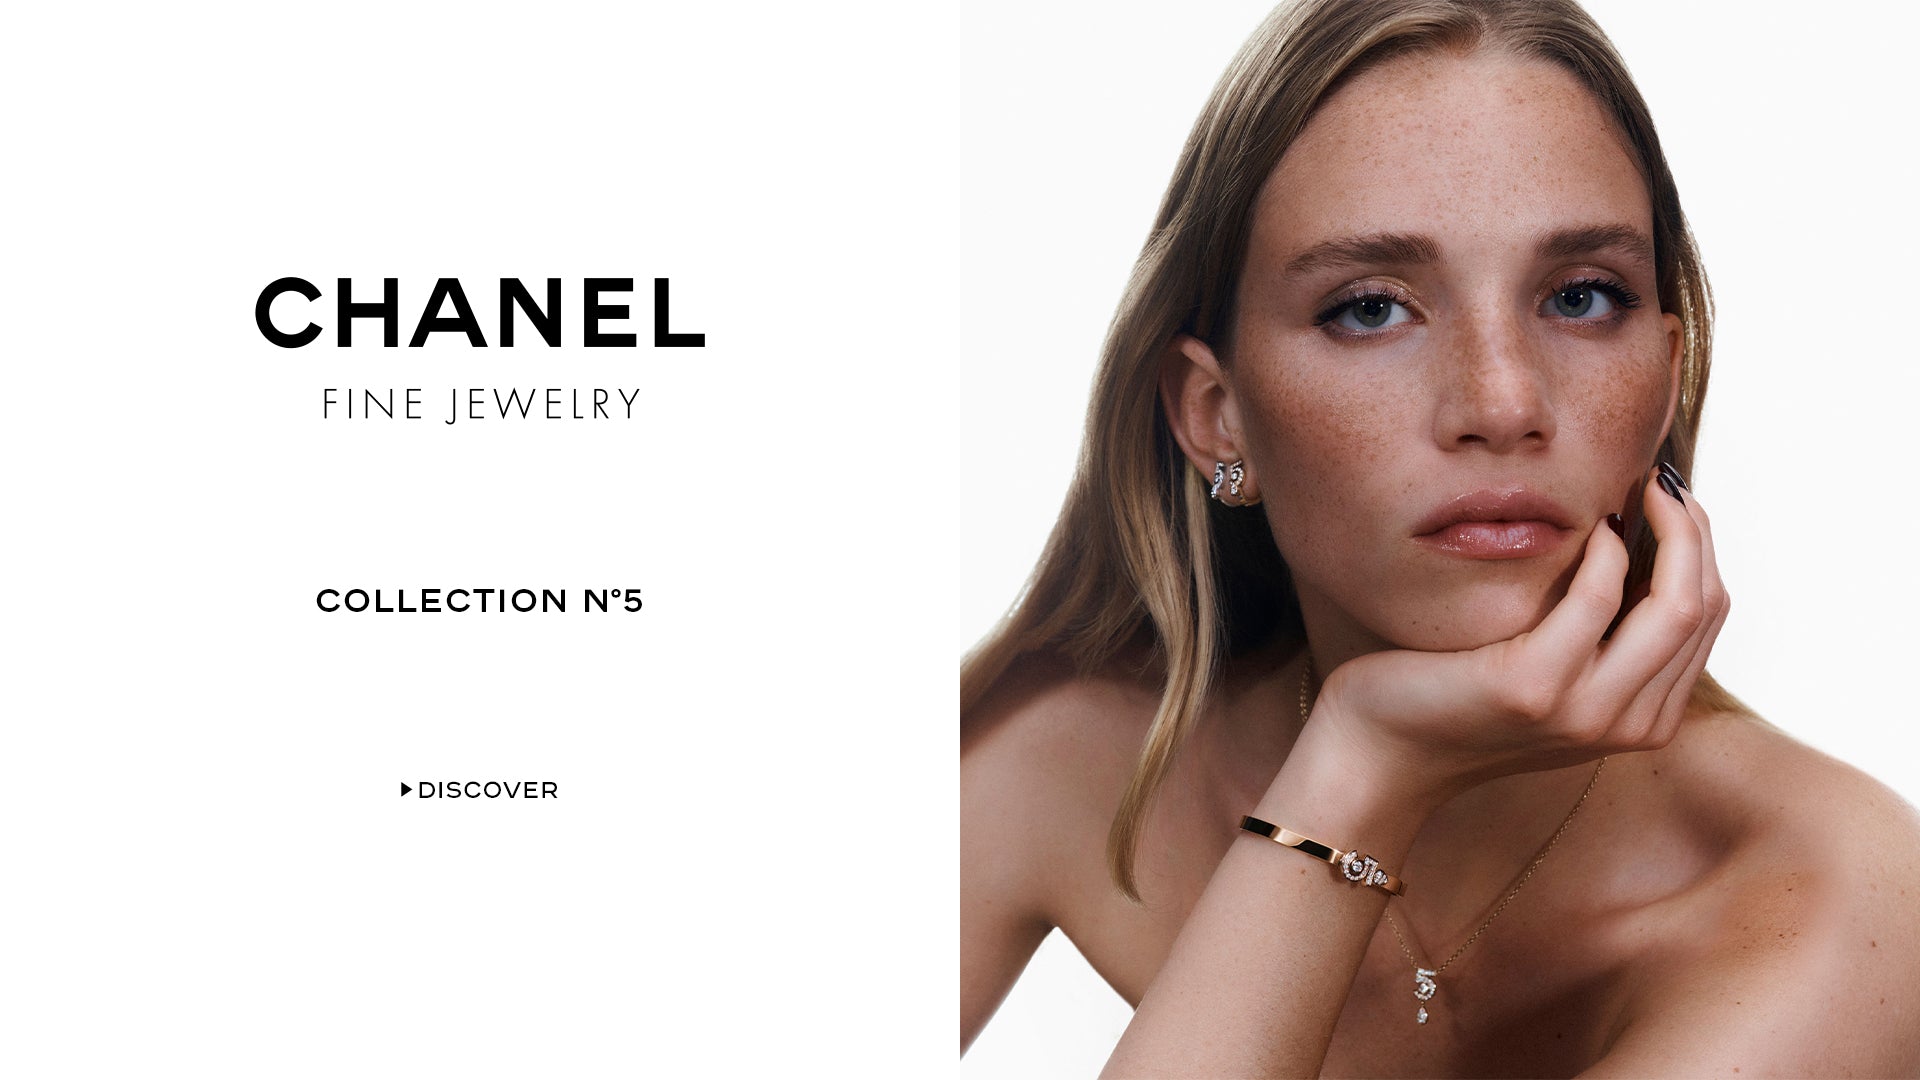 CHANEL Fine Jewelry Collection N5